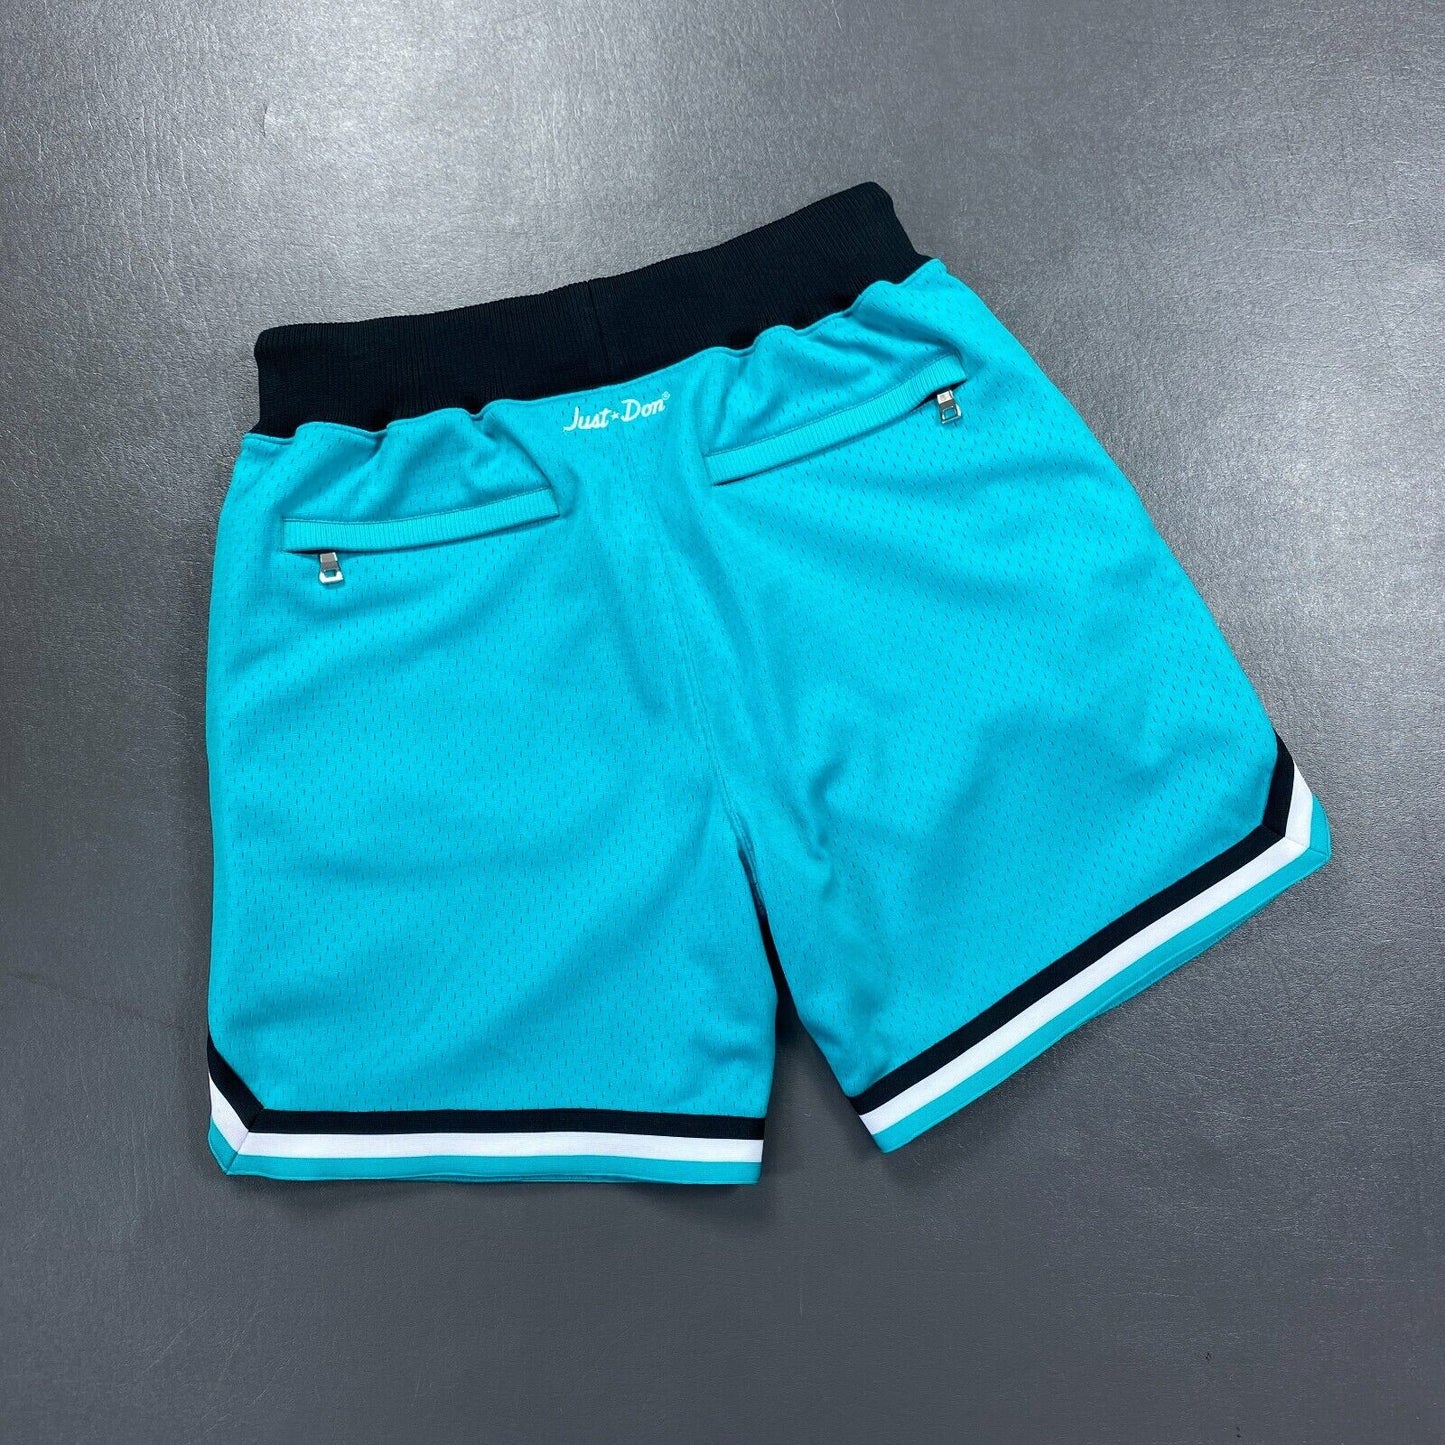 100% Authentic 93 Florida Marlins Just Don x Mitchell Ness Cooperstown Shorts M